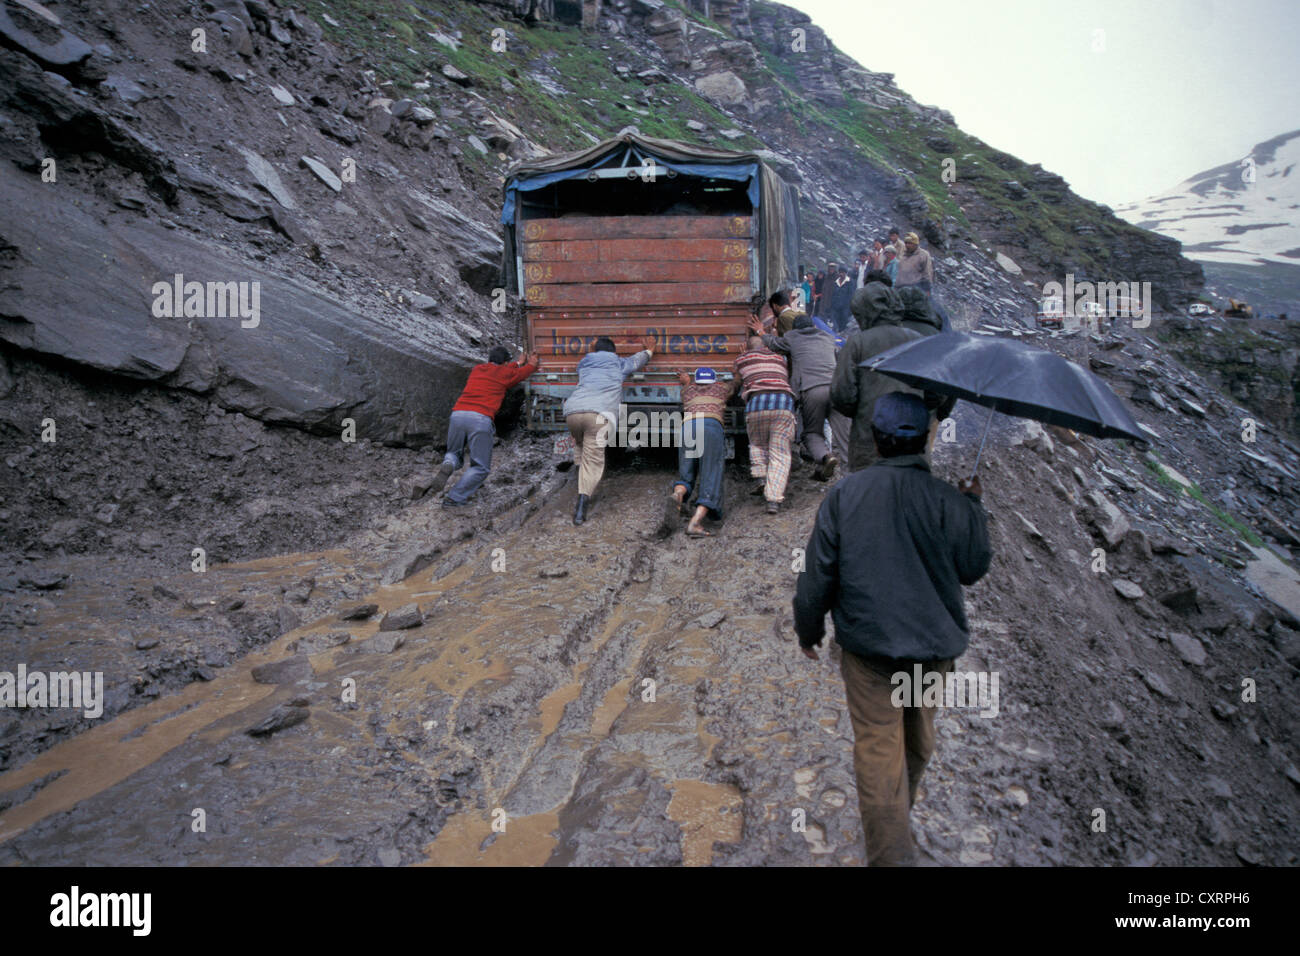 Truck is being pushed, watered down and road vulnerable to landslides, Rohtang Pass, Manali Leh Highway, Himachal Pradesh Stock Photo